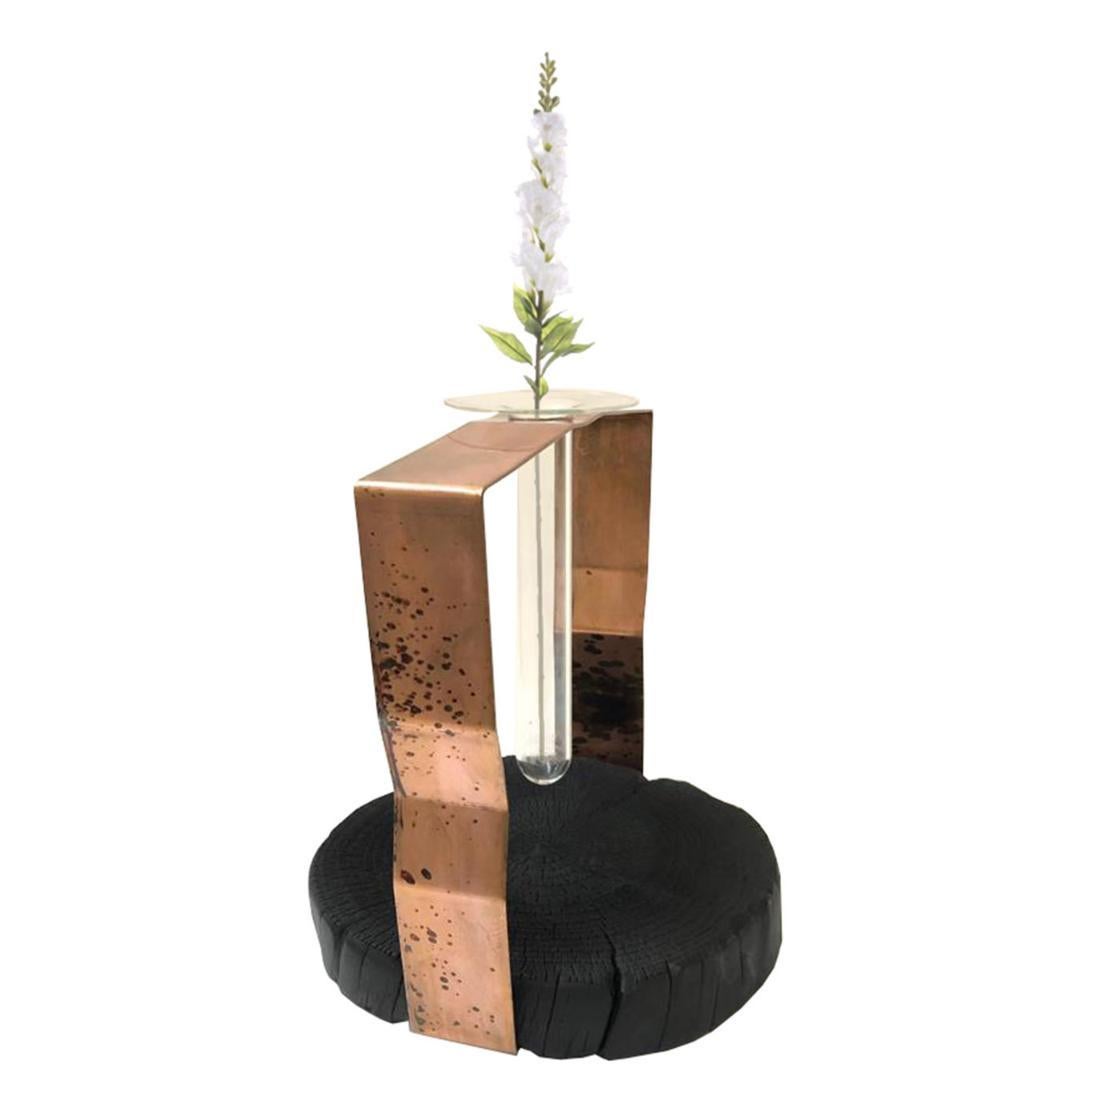 Inspired by the past, the Mummoli Collection maintains the profile of the original elements as a memory of time and regenerates them through processes of deconstruction and functionalization. Here is the crystal flower holder, made of cedar wood,